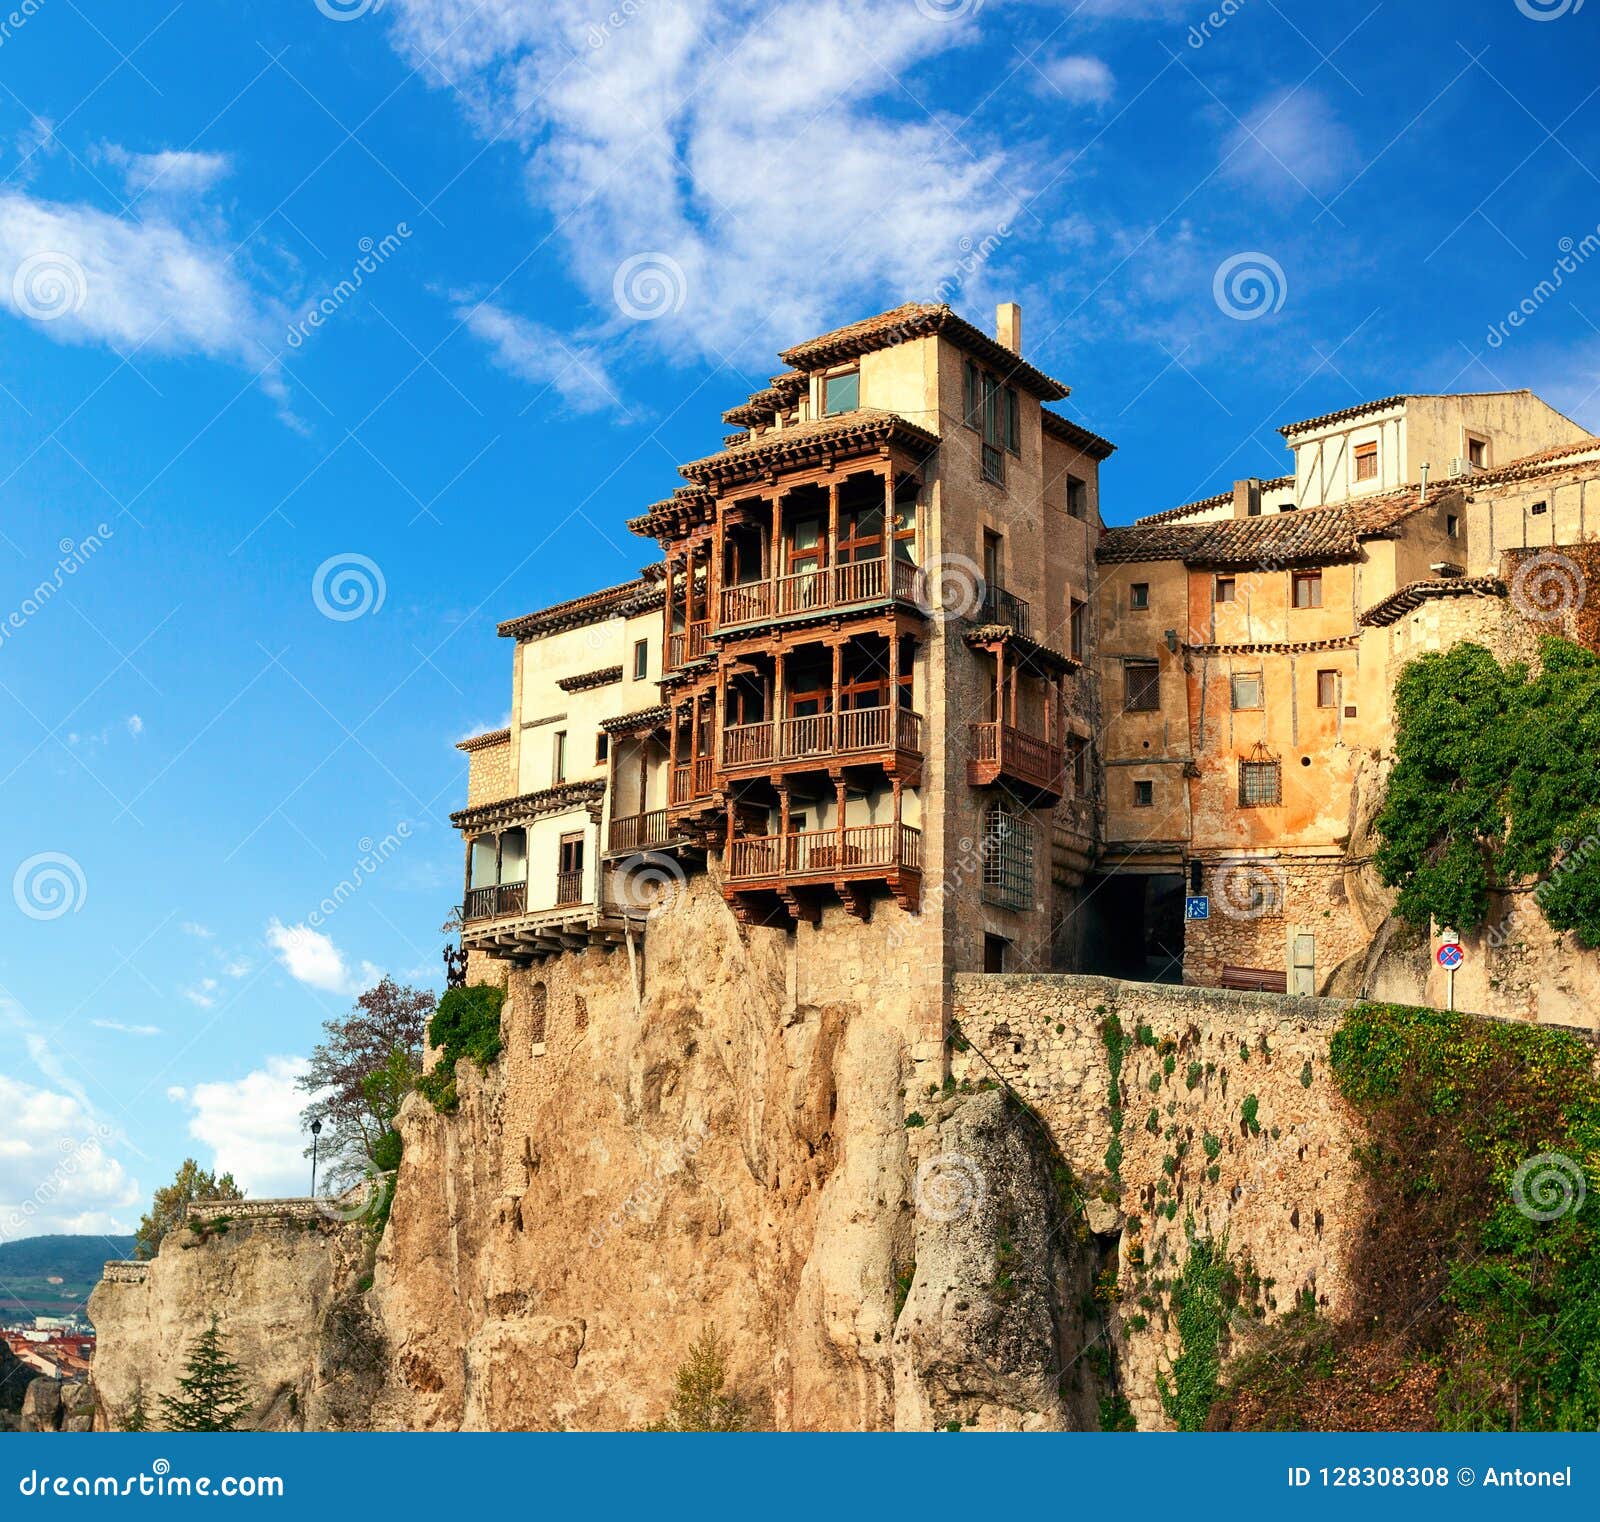 The Casas Colgadas Hanging Houses. Hanging Houses in the Town of Cuenca, Castilla La Mancha, Spain Stock Photo - Image of countries, balcony: 128308308